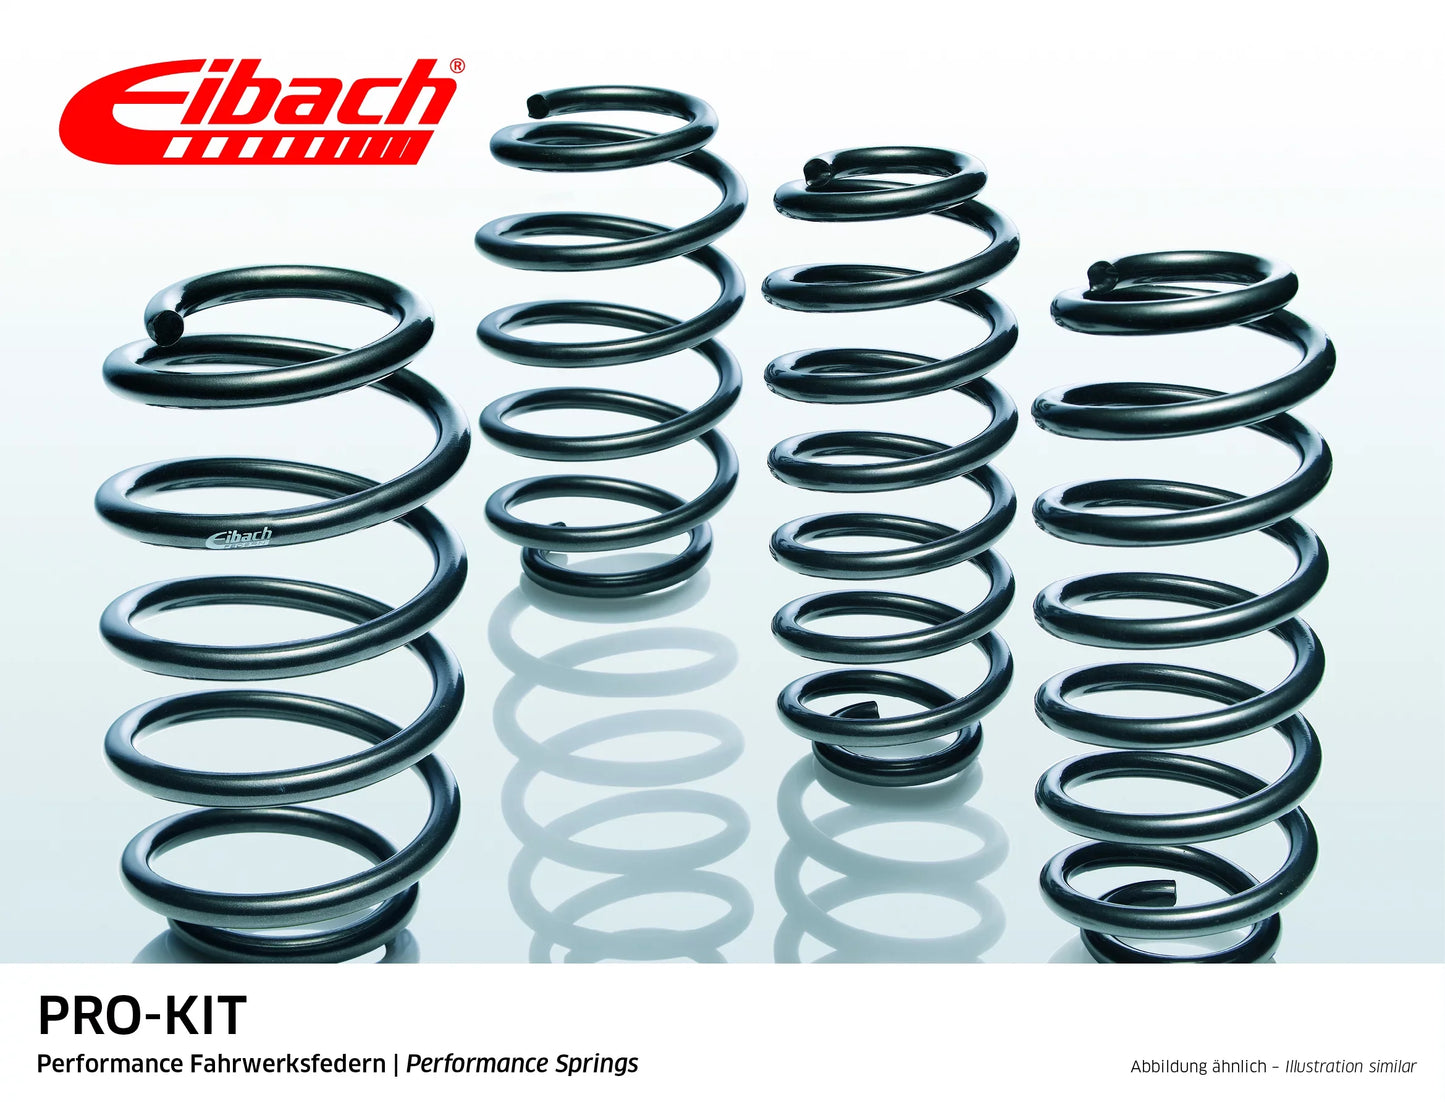 Eibach Pro-Kit Lowering Springs (E10-15-007-12-22) at £235.25